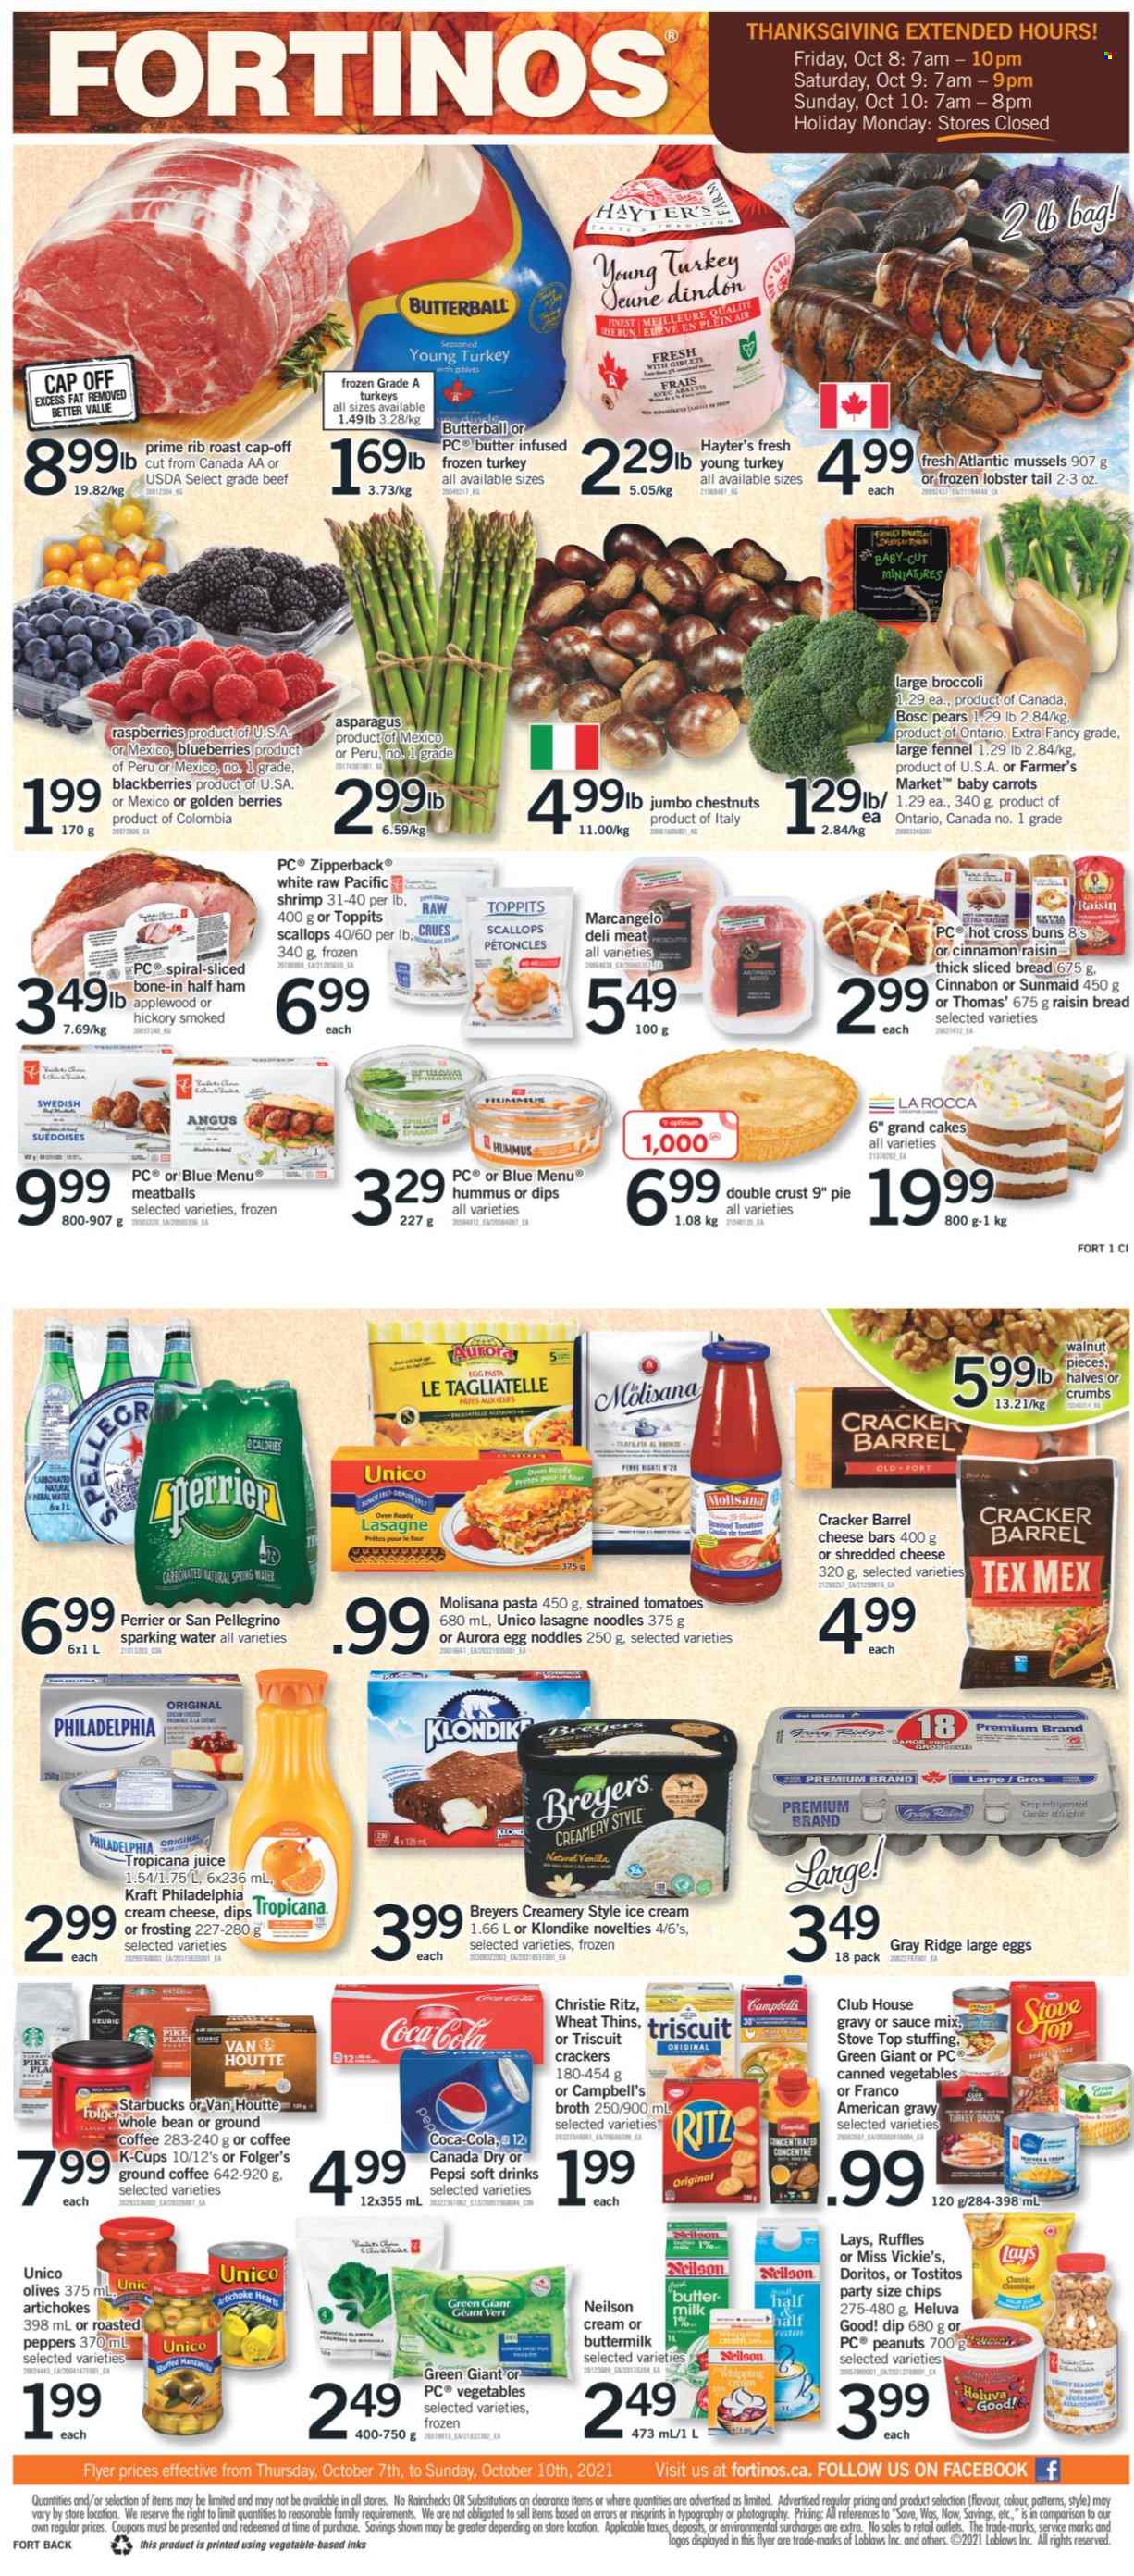 thumbnail - Fortinos Flyer - October 07, 2021 - October 10, 2021 - Sales products - bread, cake, pie, buns, artichoke, asparagus, broccoli, carrots, tomatoes, peppers, blackberries, blueberries, pears, lobster, mussels, scallops, lobster tail, shrimps, Campbell's, meatballs, pasta, noodles, Kraft®, Butterball, half ham, ham, hummus, cream cheese, shredded cheese, buttermilk, large eggs, dip, ice cream, crackers, RITZ, Doritos, Lay’s, Thins, Ruffles, Tostitos, frosting, broth, canned vegetables, fennel, walnuts, chestnuts, peanuts, Canada Dry, Coca-Cola, Pepsi, juice, soft drink, Perrier, spring water, San Pellegrino, coffee, ground coffee, coffee capsules, Starbucks, K-Cups, whole turkey, turkey, bag, stove, cap, gun, Philadelphia, olives. Page 1.